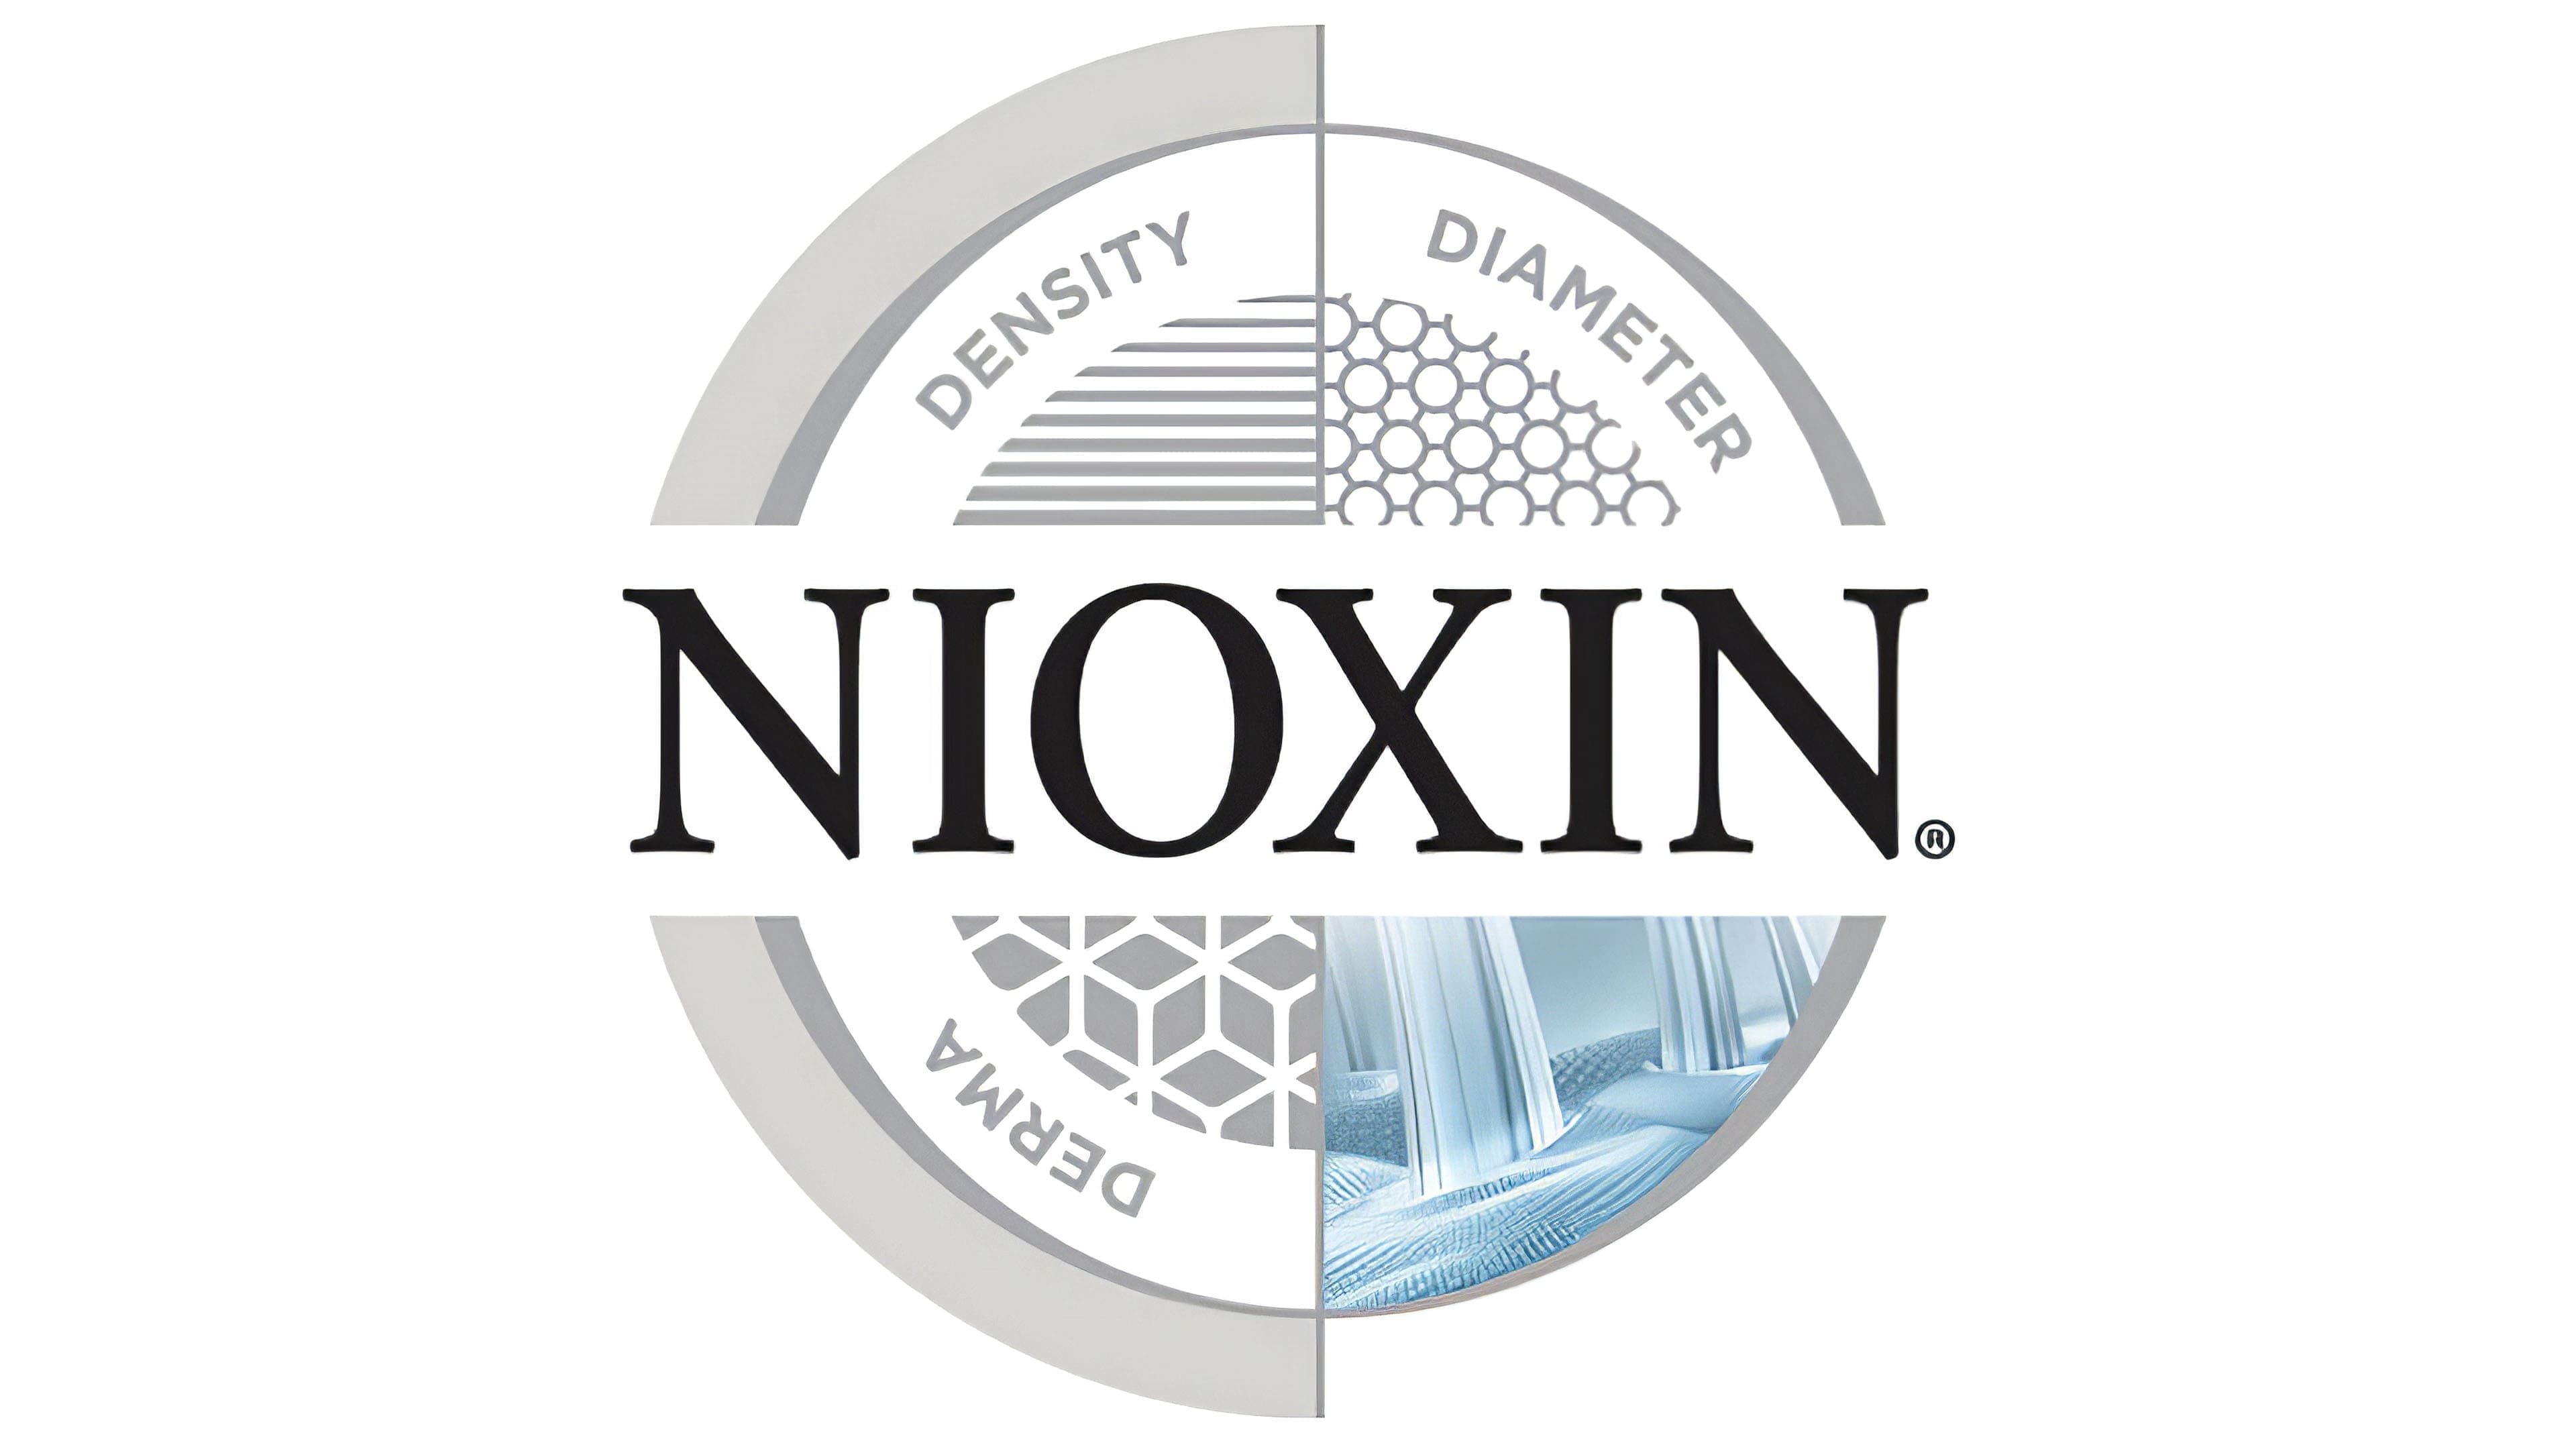 About the Brand - Nioxin